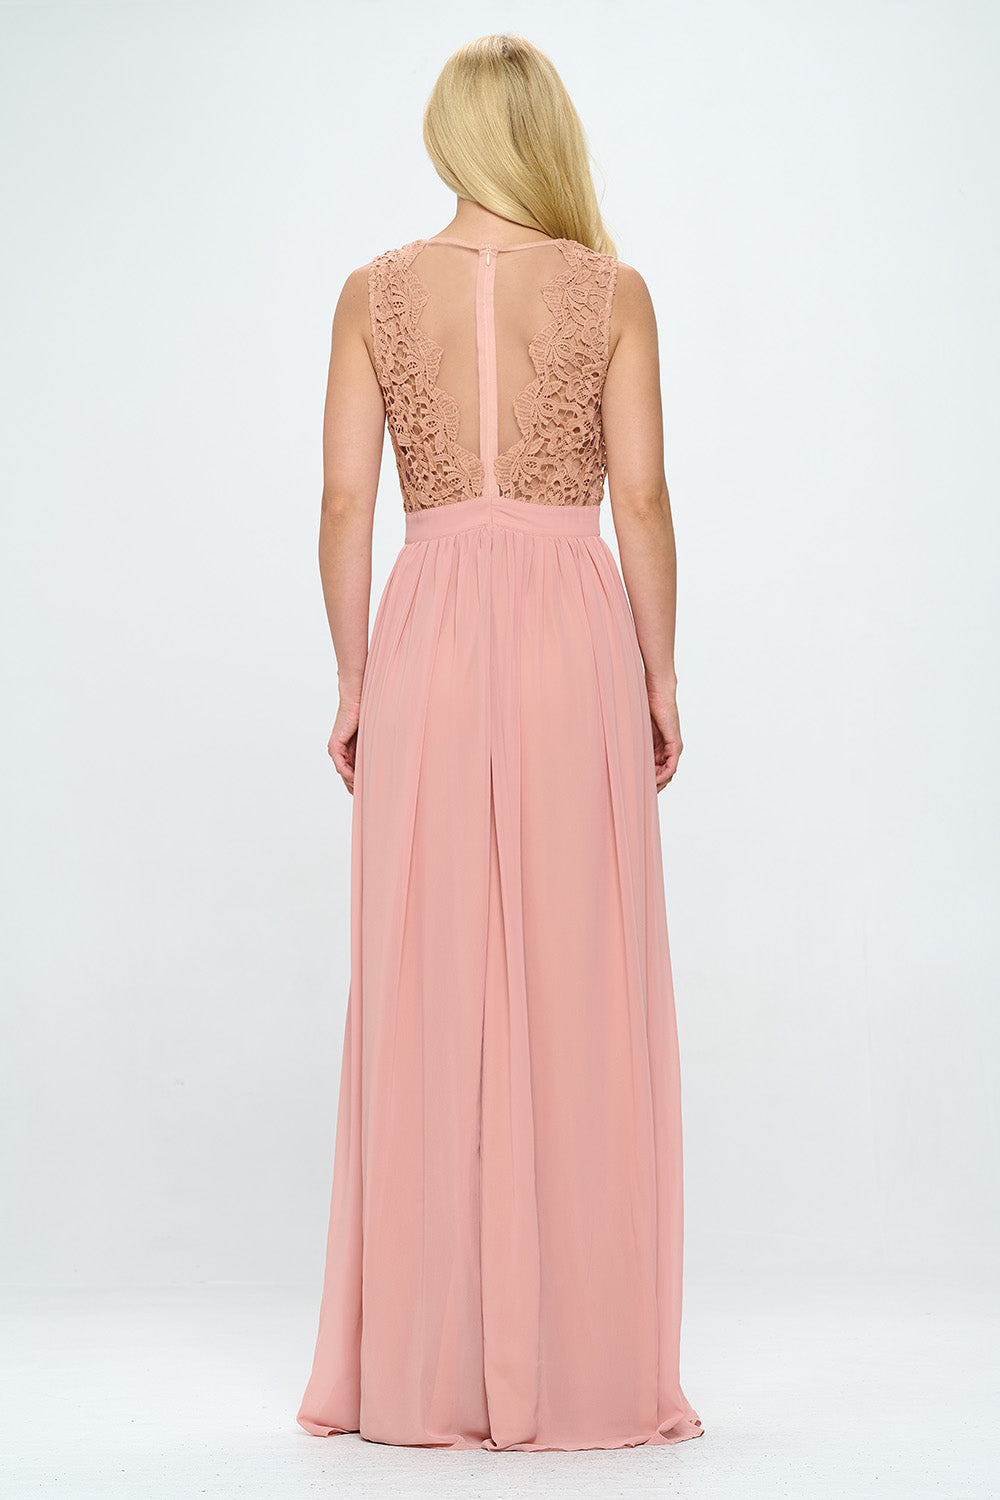 EMBROIDERED LACE FLOOR LENGTH SHEER MAXI DRESS